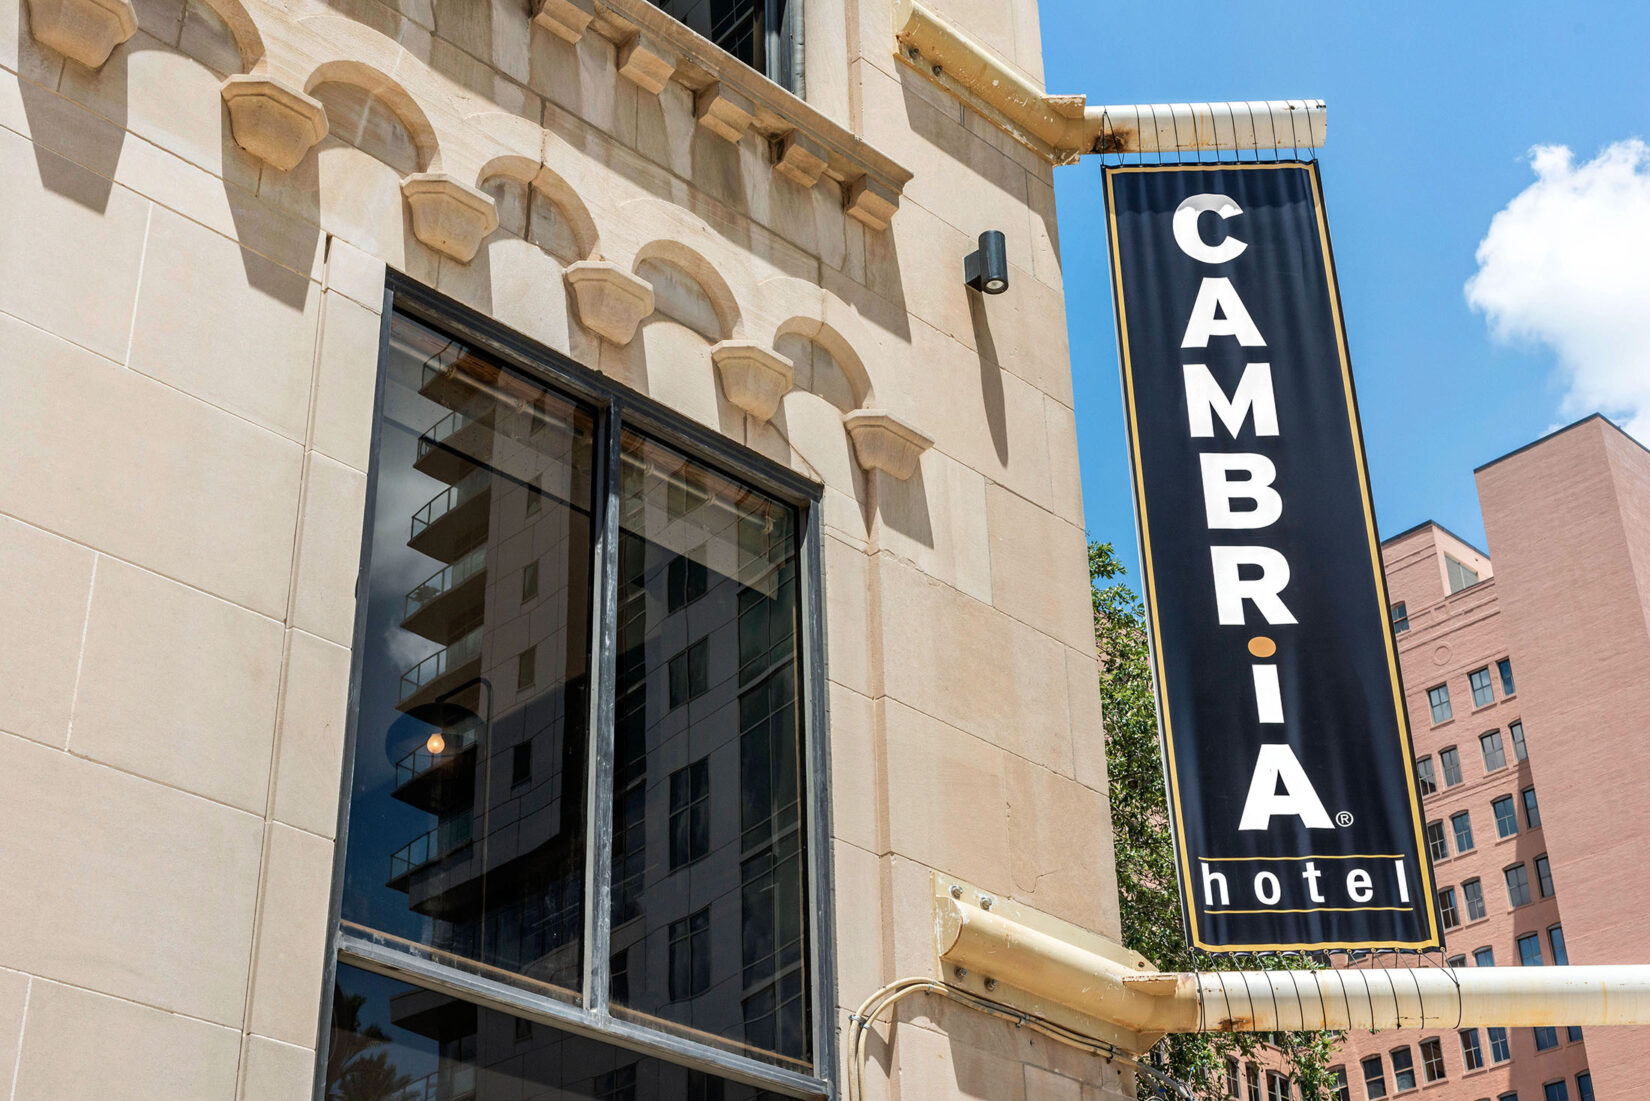 The exterior of the Cambria Hotel in Houston, Texas.